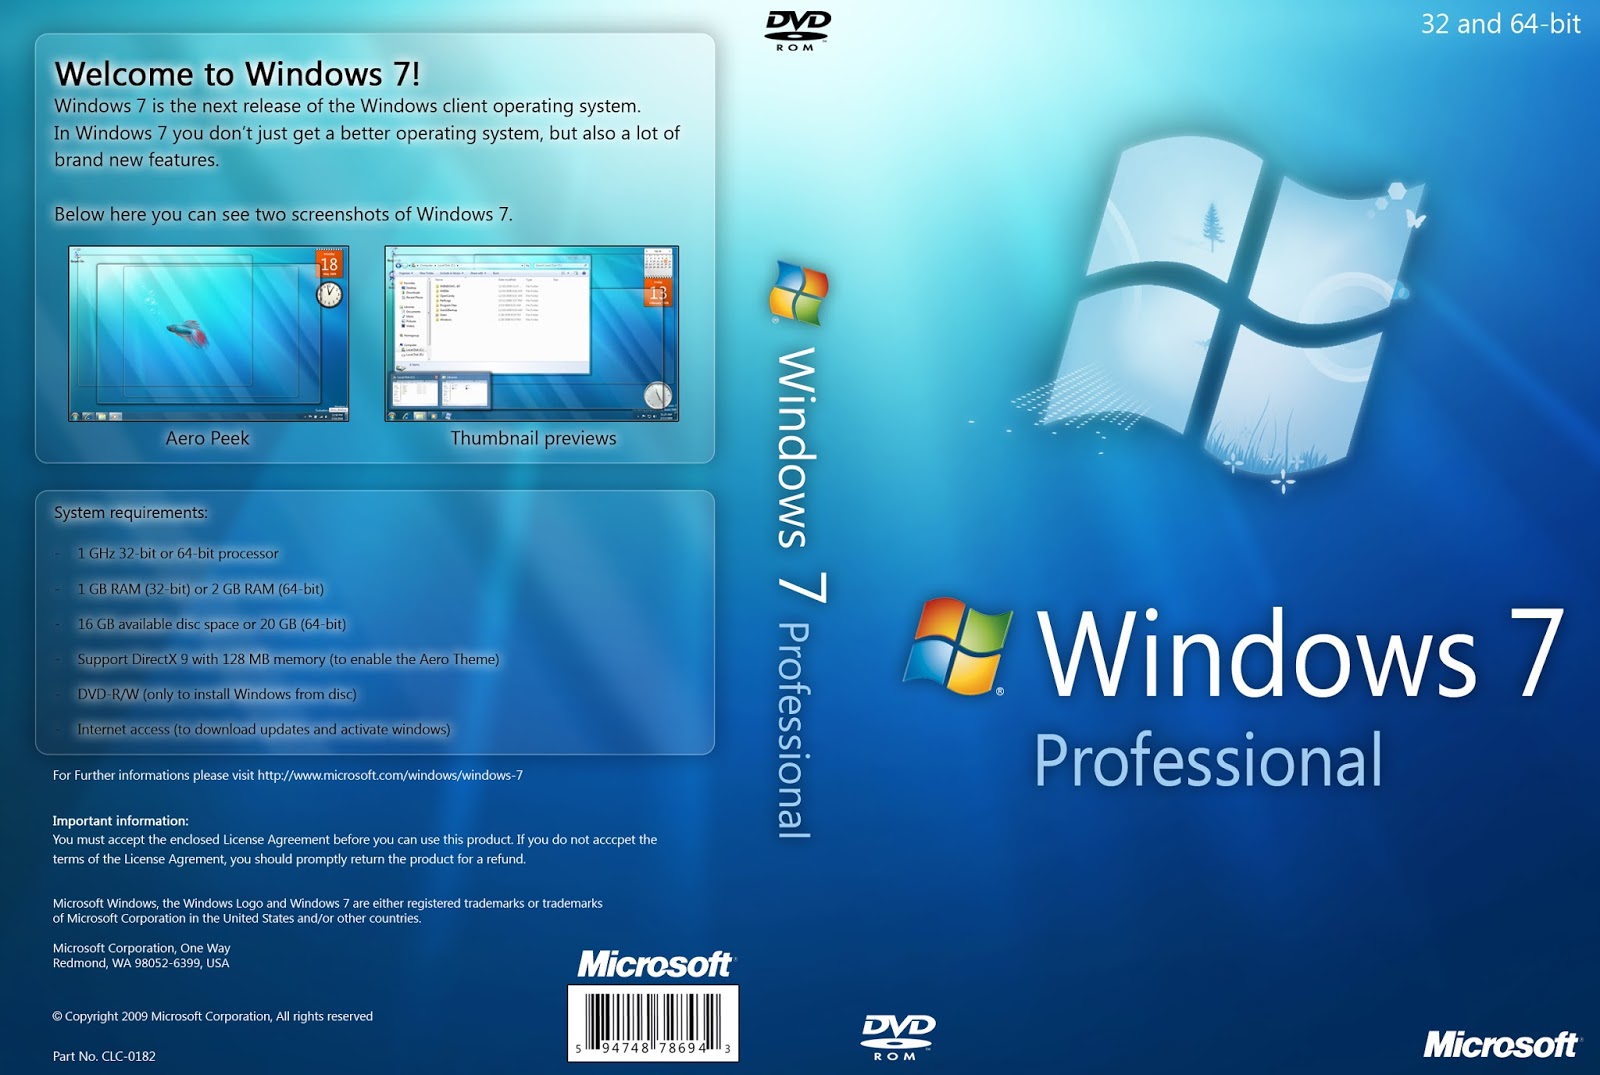 windows 7 professional x64 review